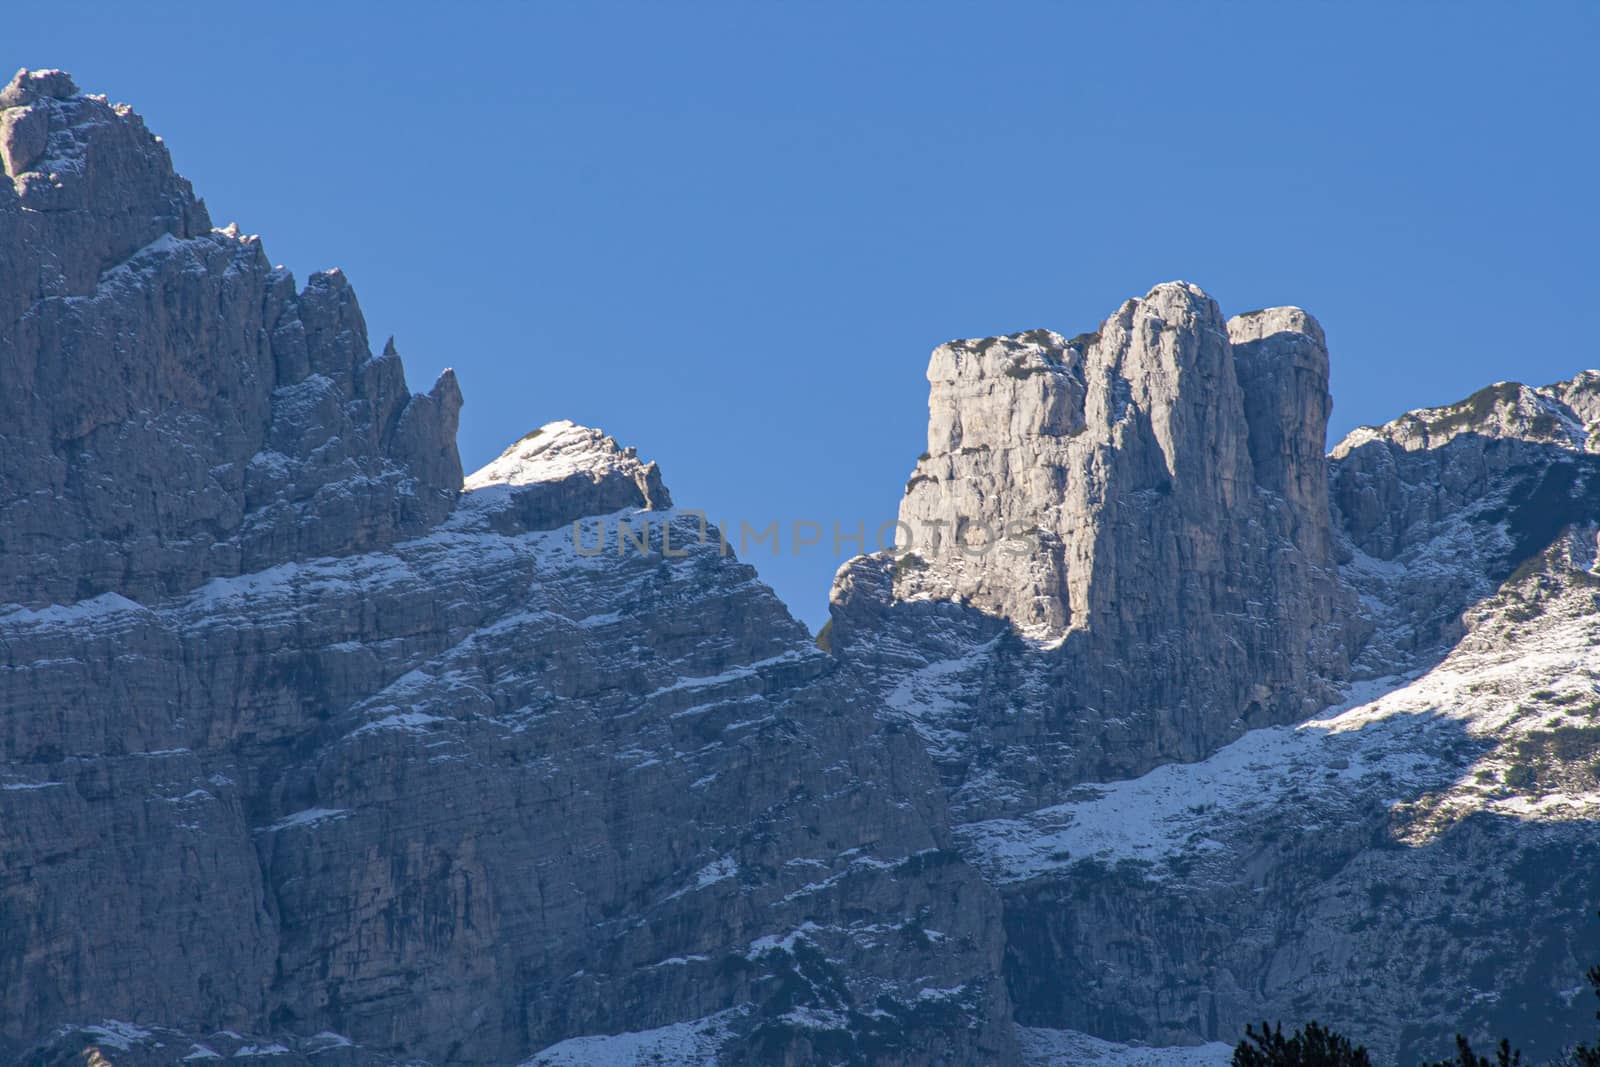 Mountain detail on Dolomites 5 by pippocarlot